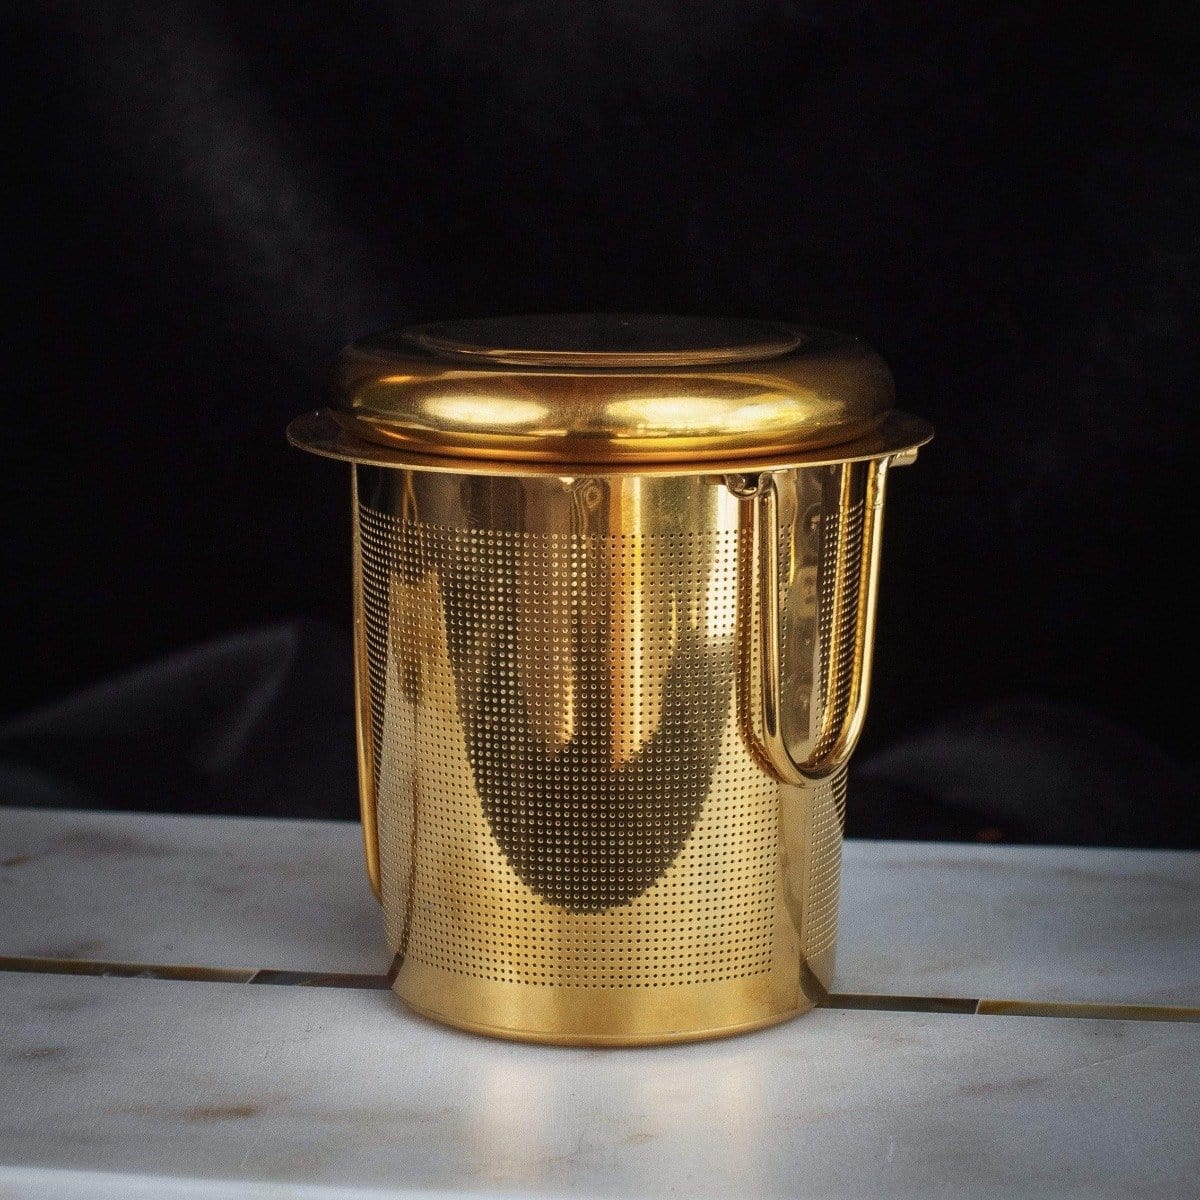 A gold-toned metallic tea infuser with a cylindrical shape and a perforated body, featuring a fitted lid and a handle, is perfect for brewing your favorite Loose Leaf Tea. The PMB Mesh Screen Company's Midas Touch: Golden-Hued Tea Strainer is placed against a dark background on a light-colored surface.